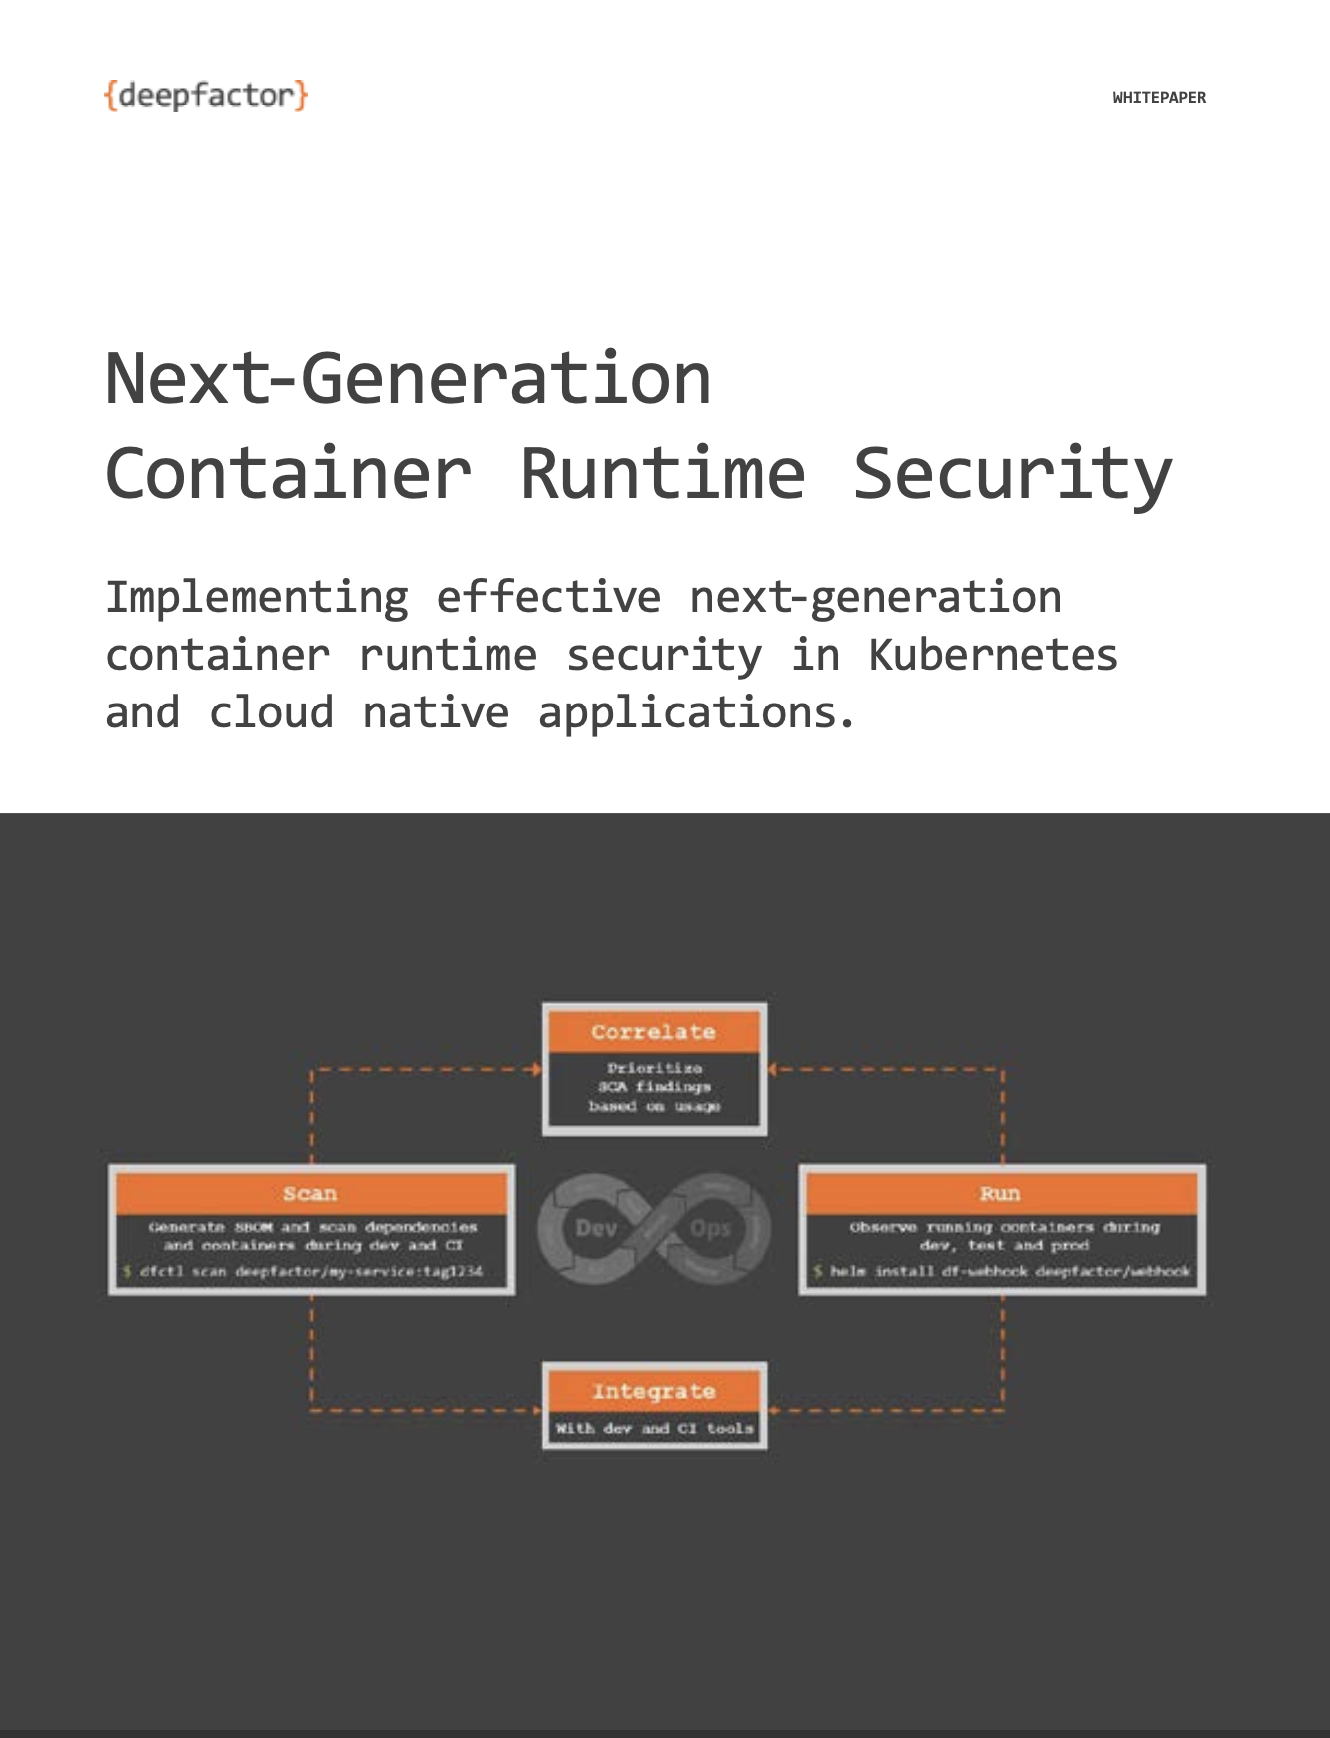 Implement Effective Next-Gen Container Runtime Security in Kubernetes and Cloud Native Apps